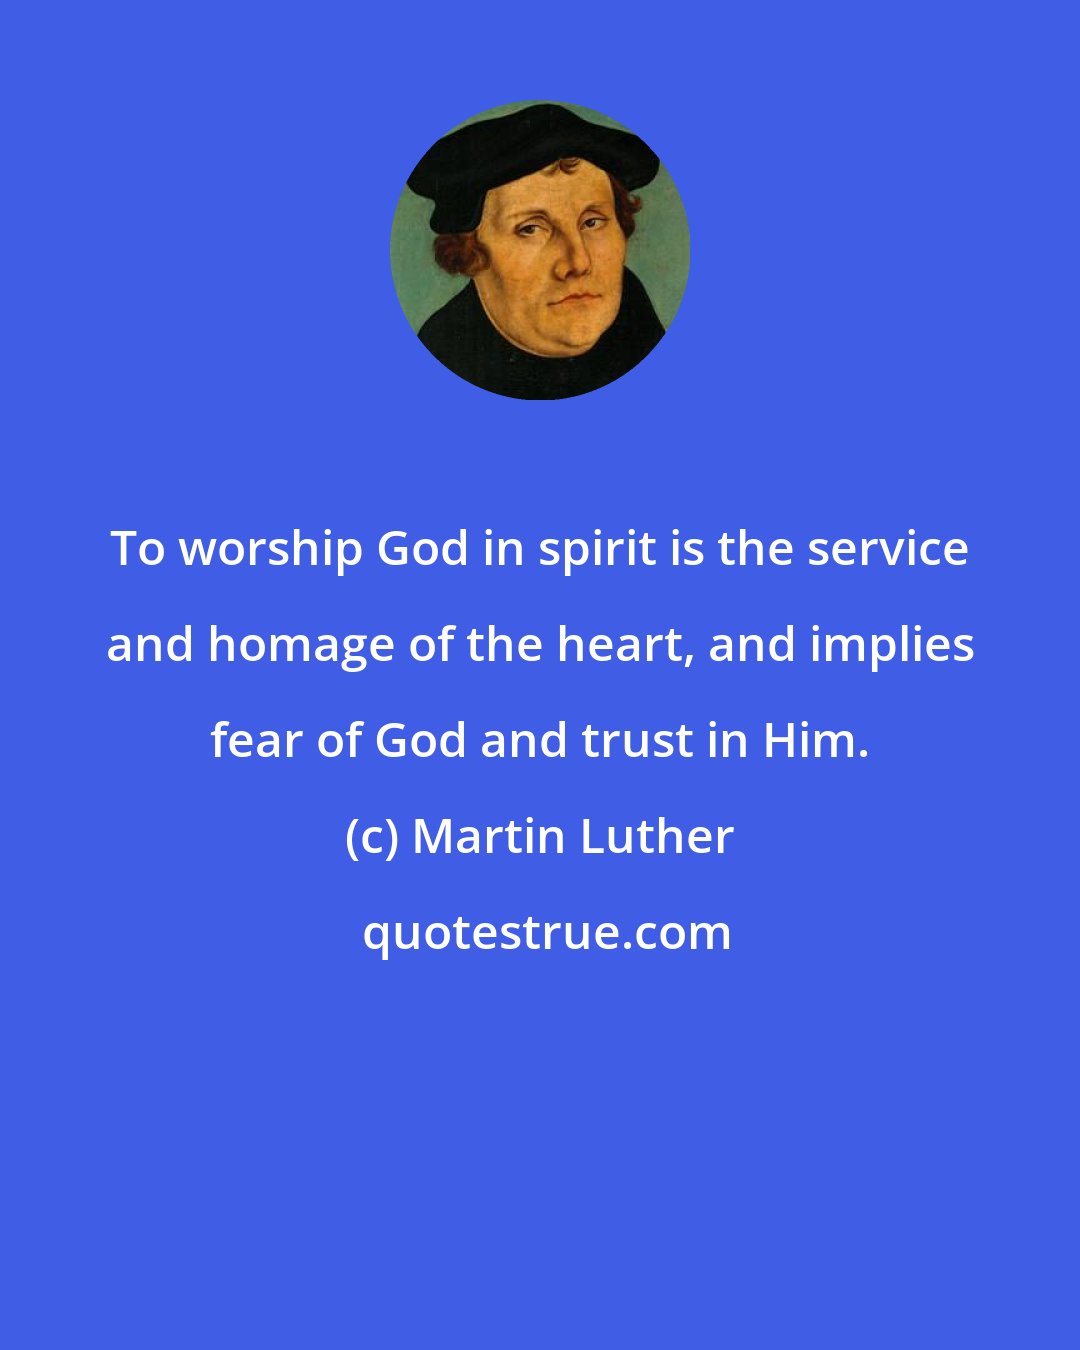 Martin Luther: To worship God in spirit is the service and homage of the heart, and implies fear of God and trust in Him.